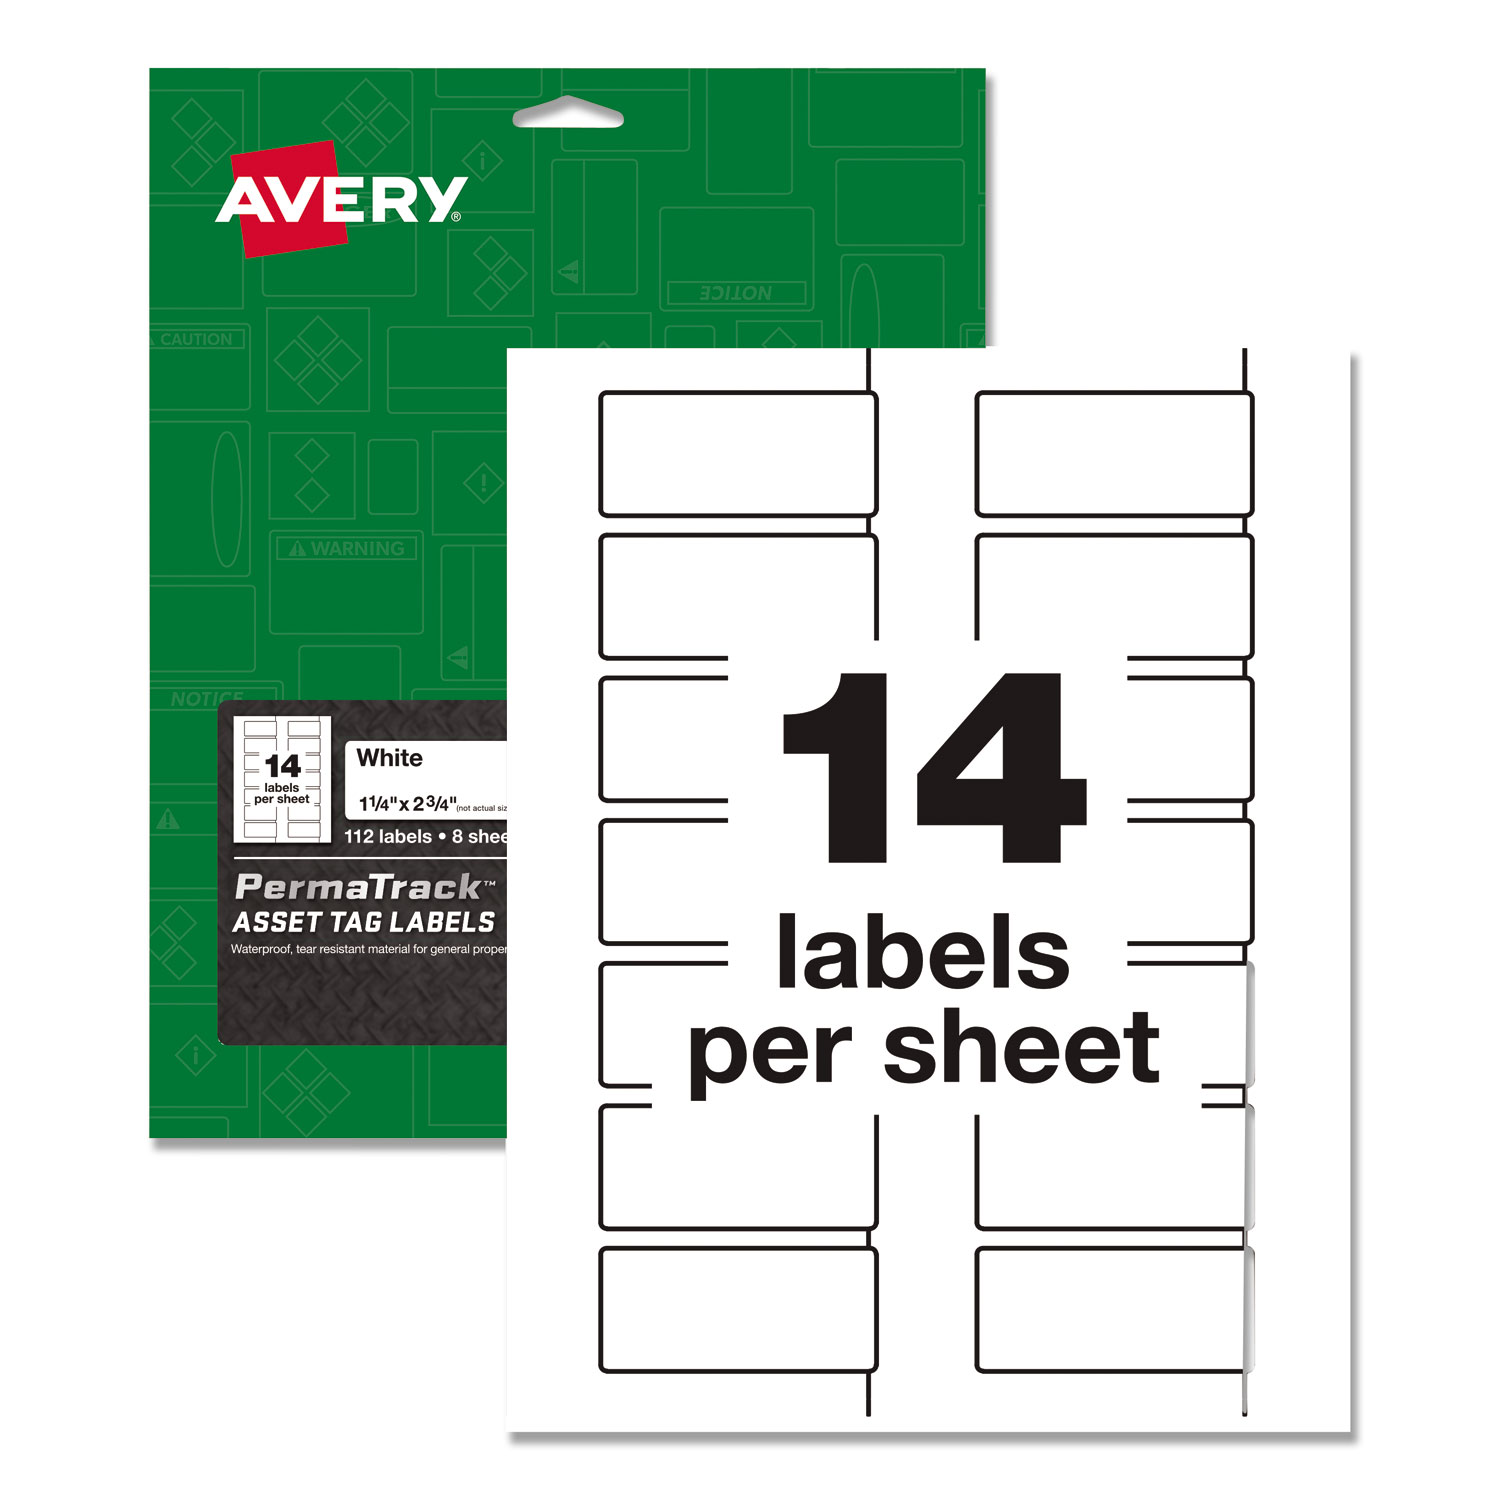  Avery 61529 PermaTrack Durable White Asset Tag Labels, Laser Printers, 1.25 x 2.75, White, 14/Sheet, 8 Sheets/Pack (AVE61529) 